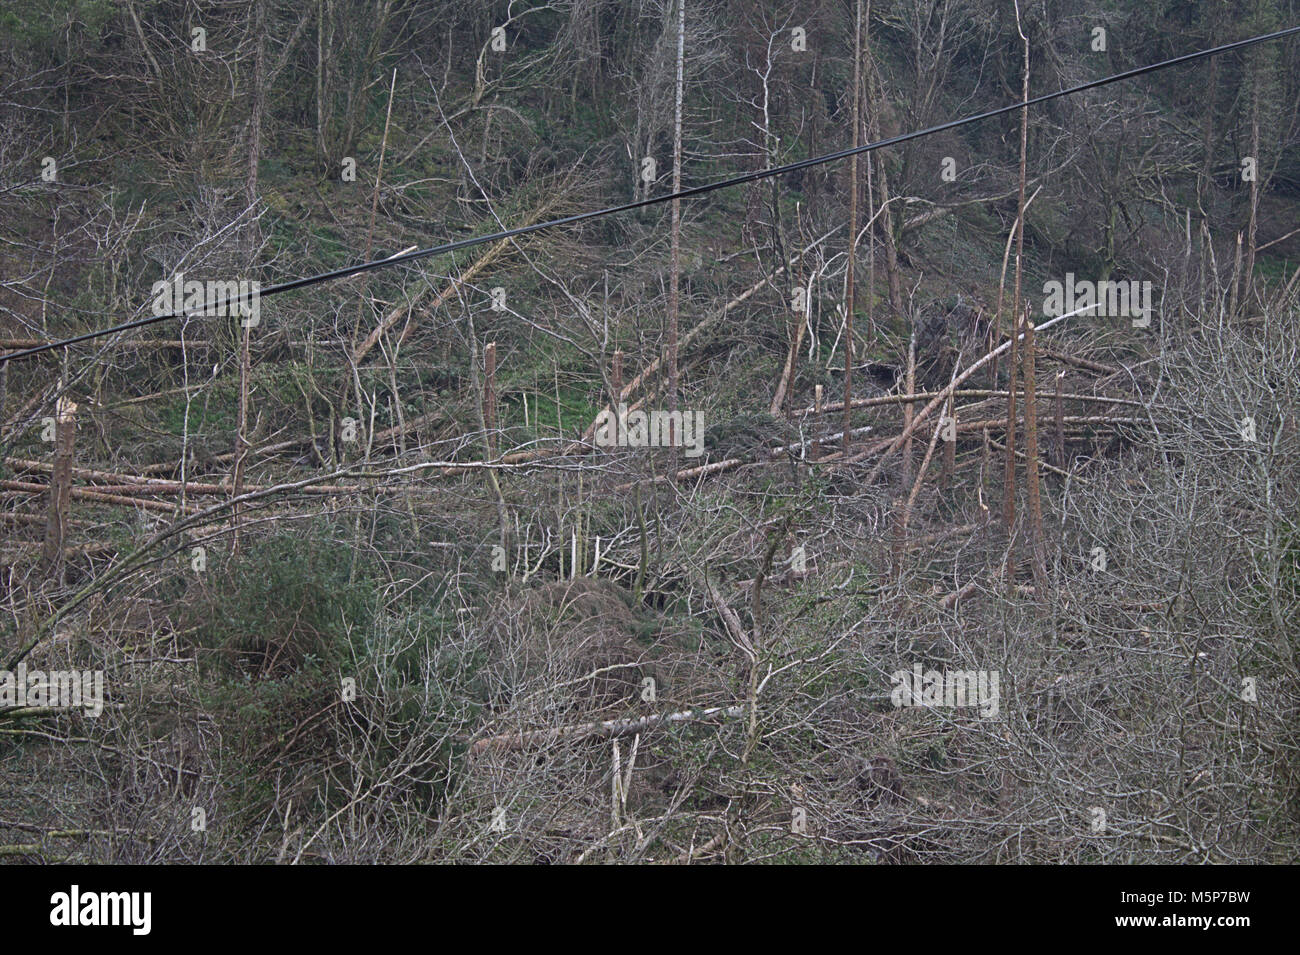 West Cork, Ireland. 25th February, 2018. Storm Ophelia's legacy can still be seen along the roads of West Cork, with damaged walls and tree's snapped like twigs still to be cleared. Credit: aphperspective/Alamy Live News Stock Photo